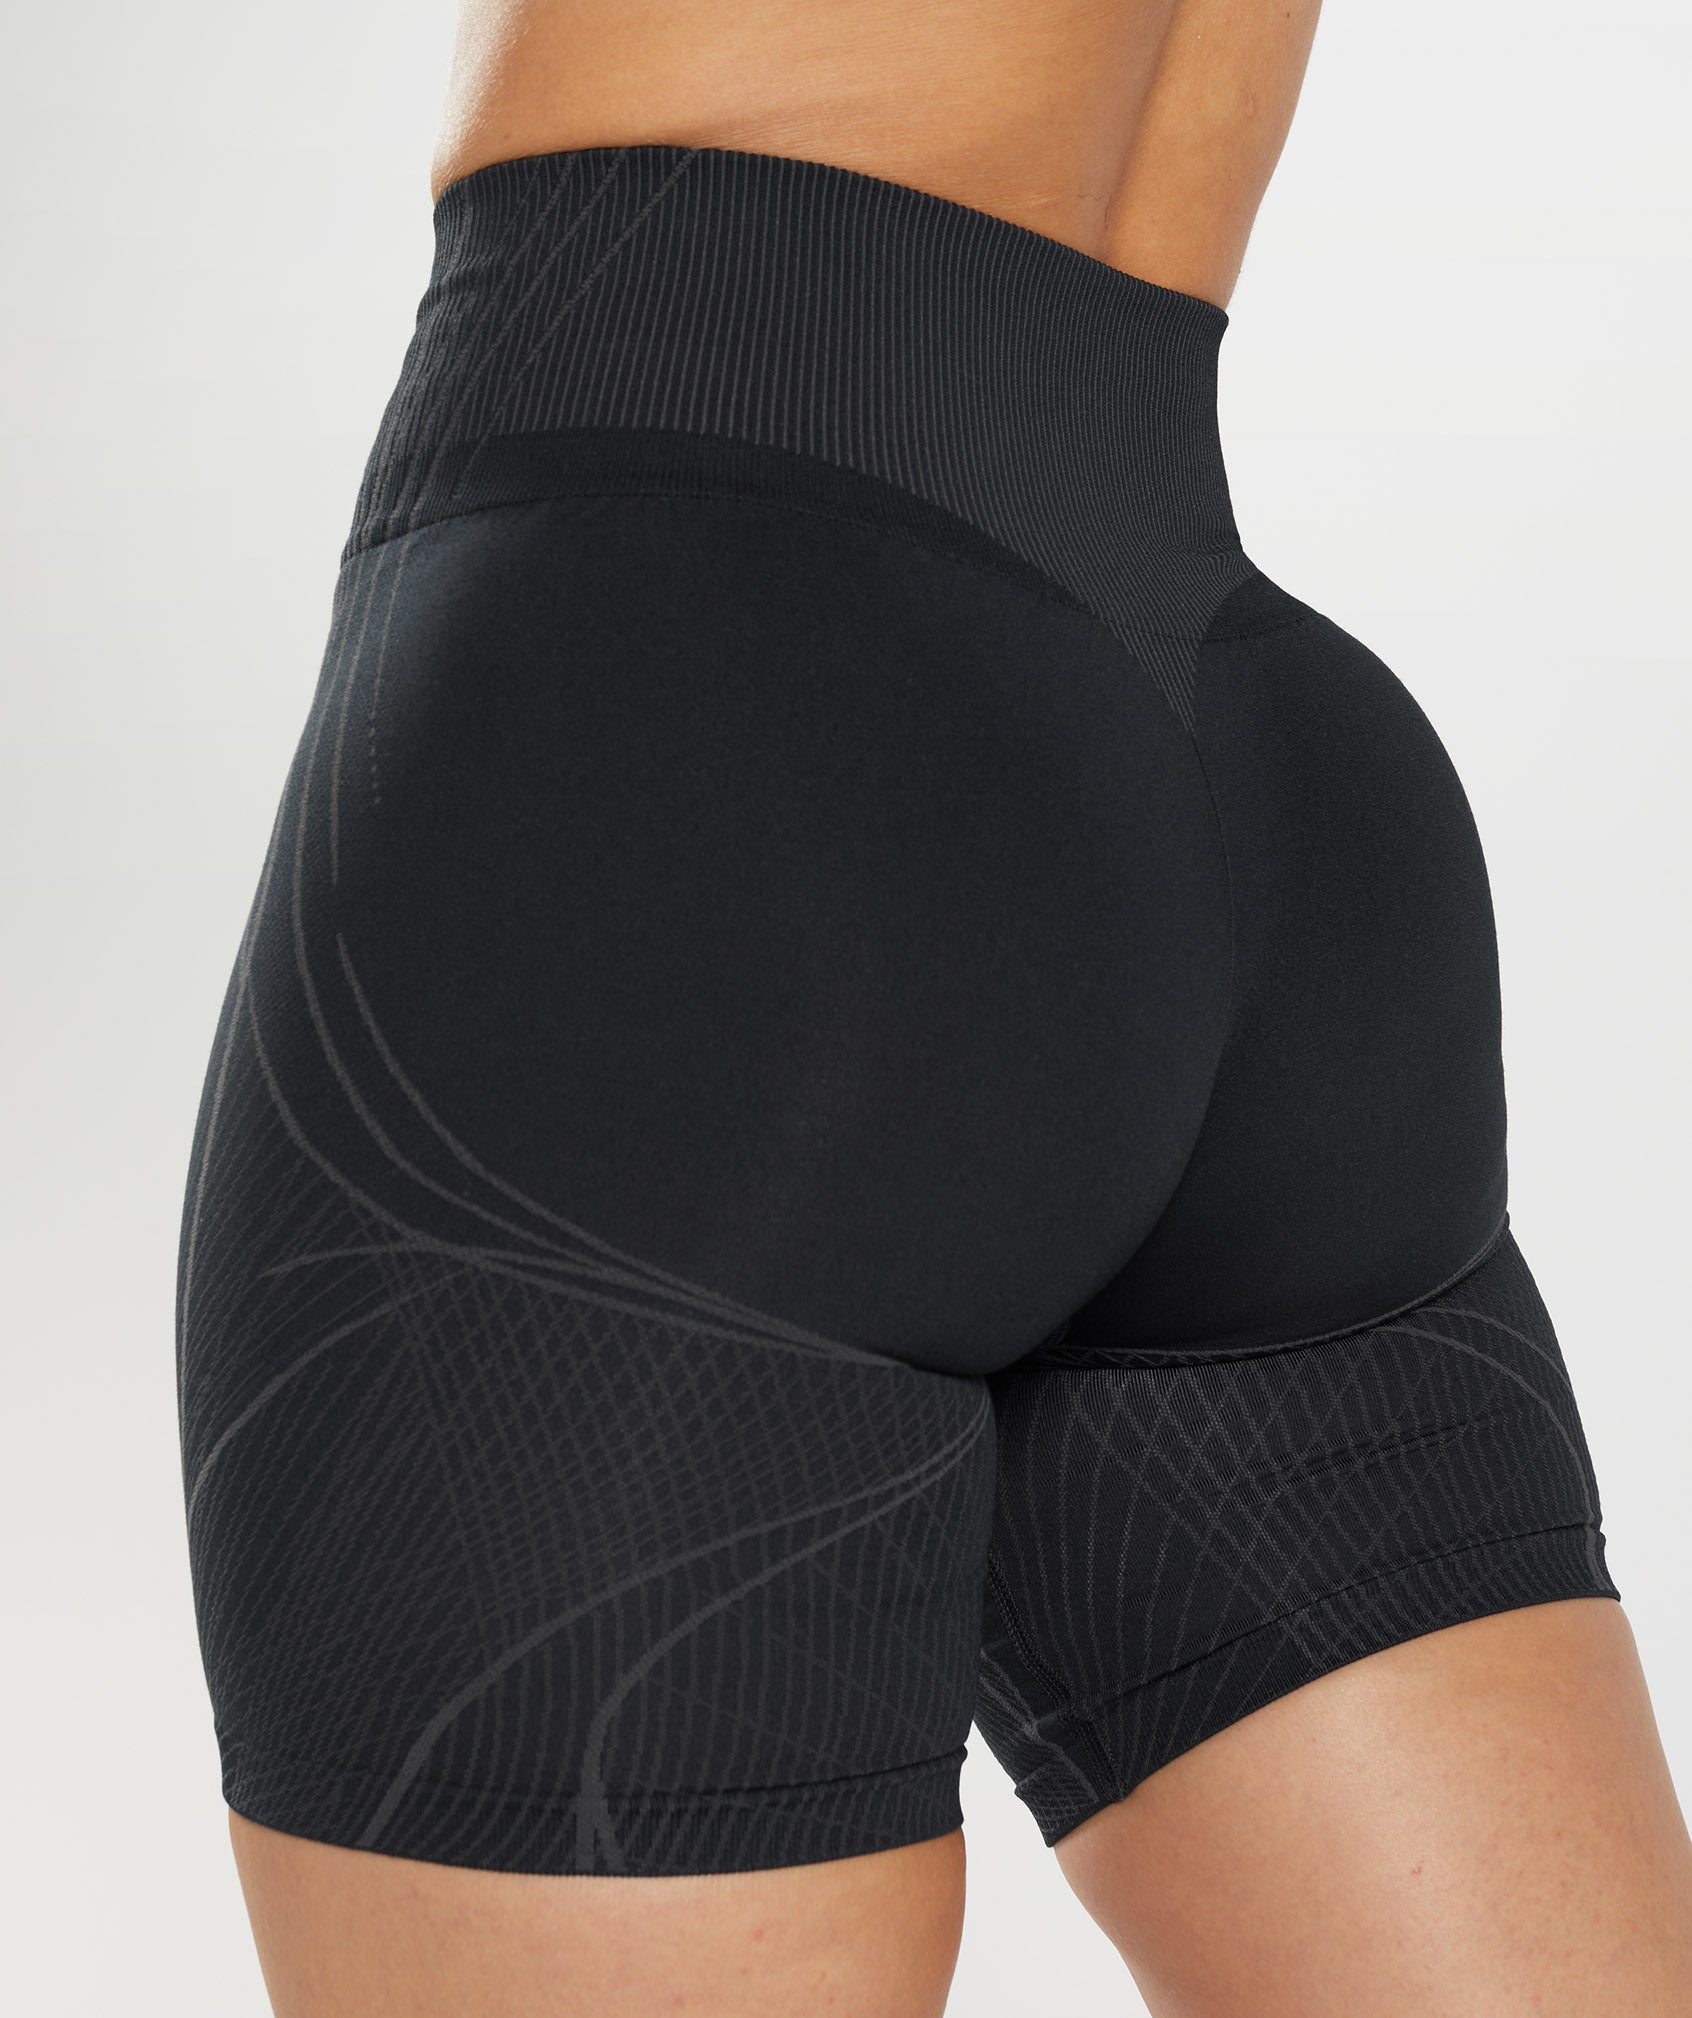 Apex Seamless Shorts in Black/Onyx Grey - view 5